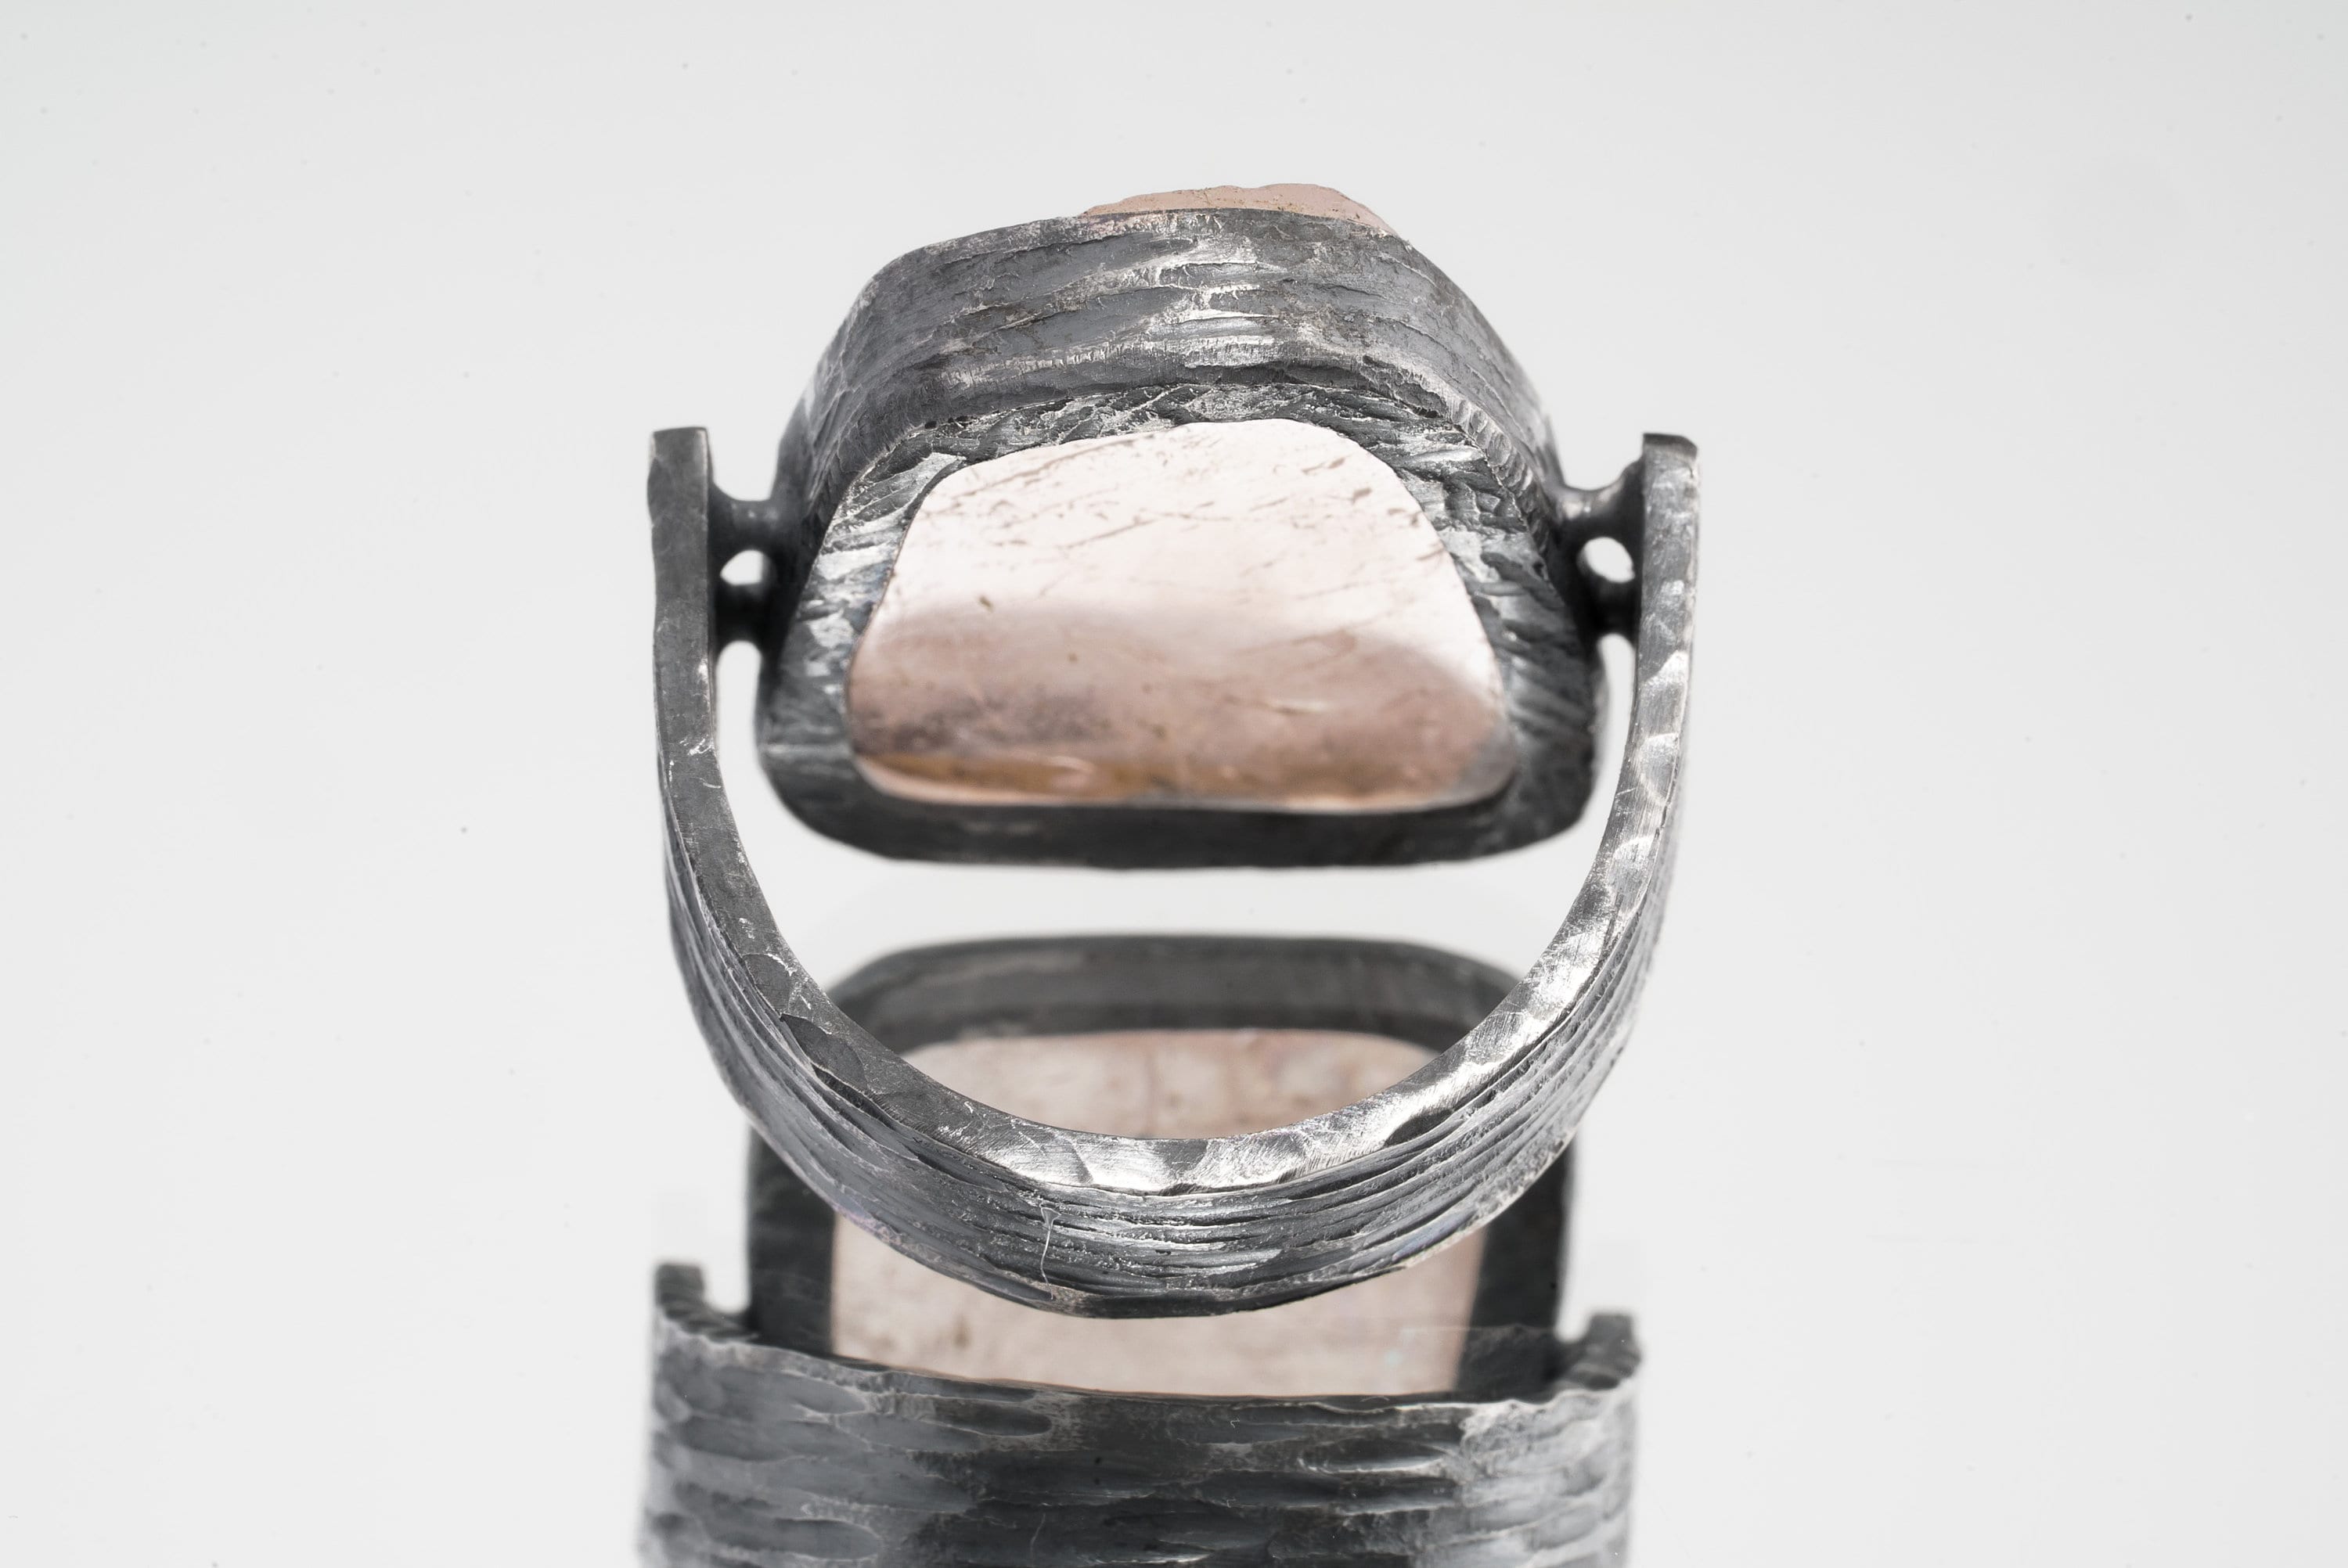 Rainbow Laced Pink Kunzite - Rustic Comfortable Crystal Ring - Size 9 US - 925 Sterling Silver - Abstract Textured & Oxidised